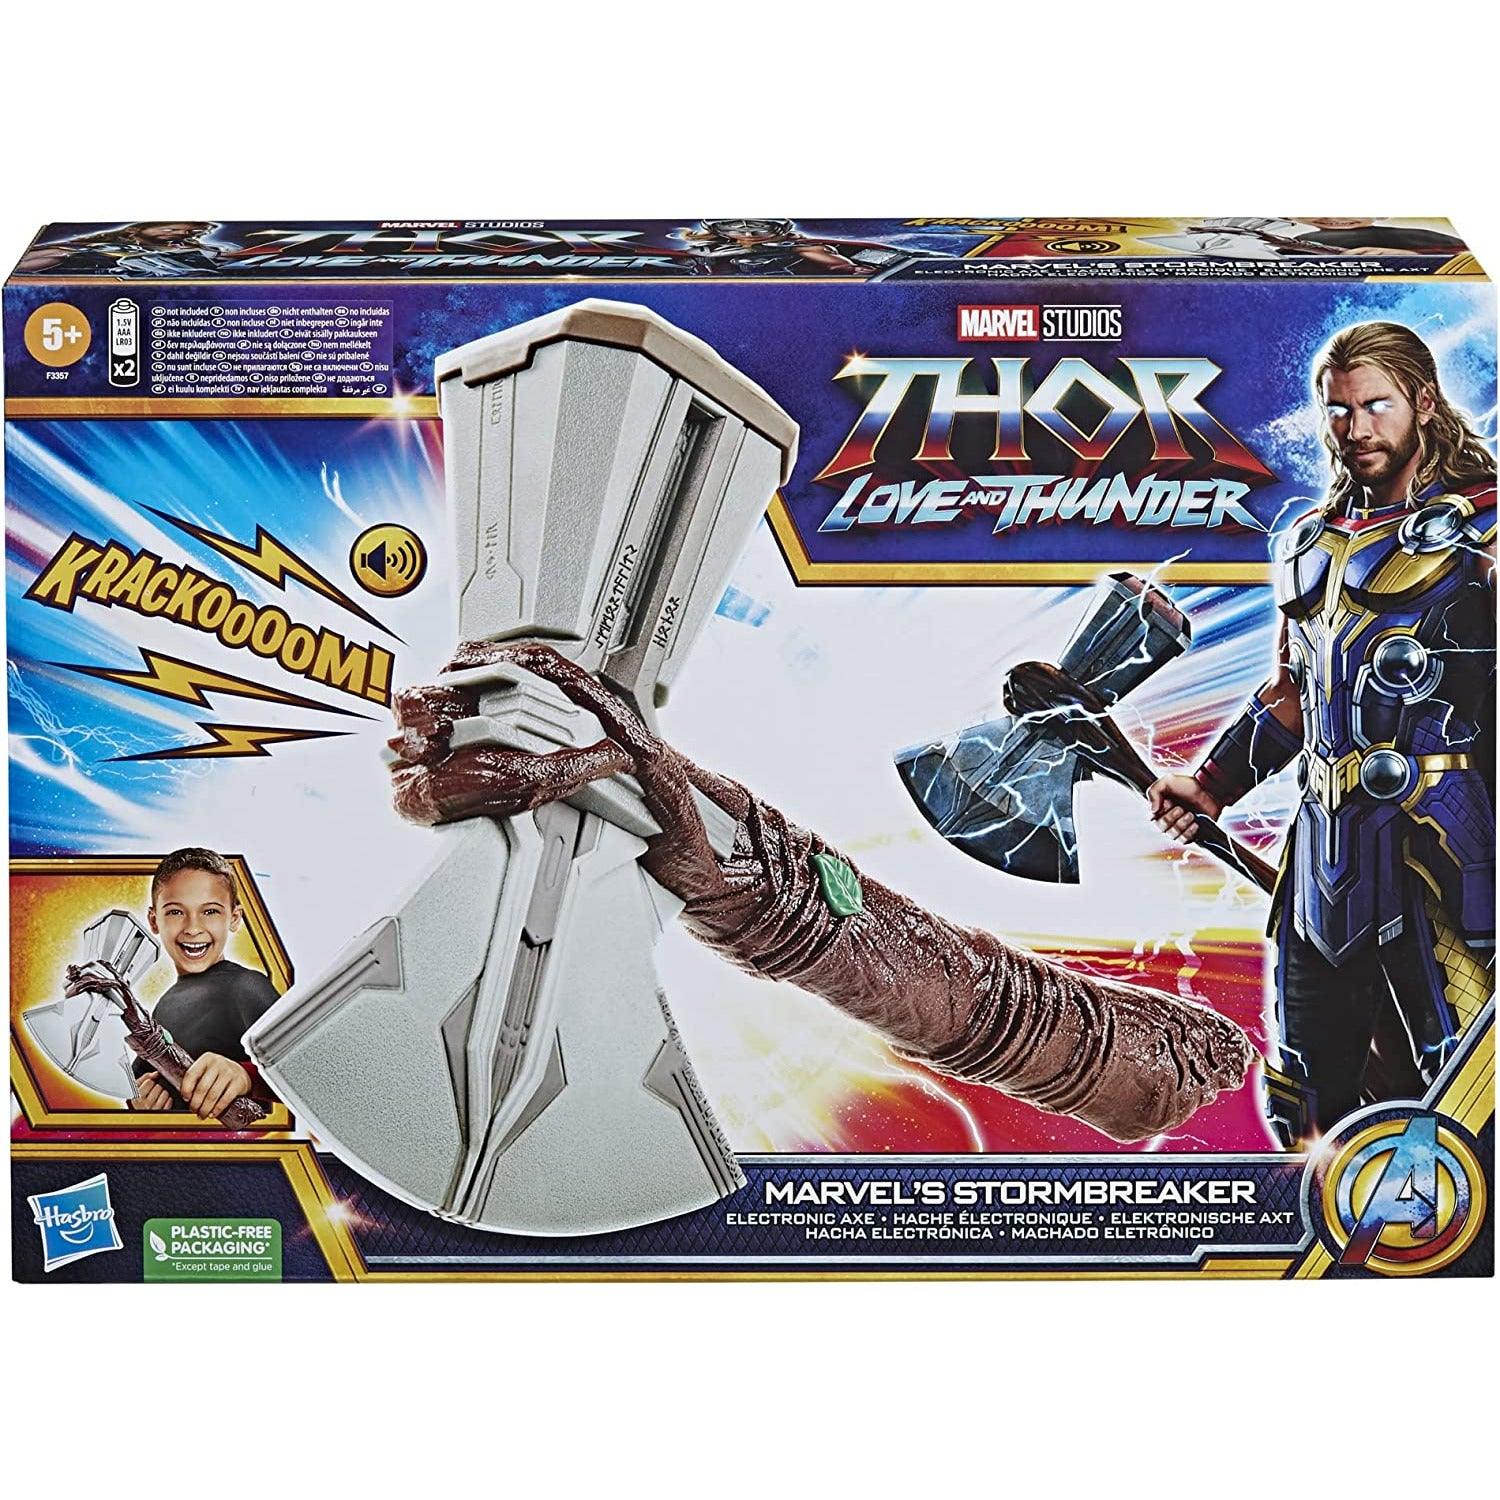 Marvel Studios’ Thor: Love and Thunder Stormbreaker Electronic Axe Thor Roleplay Toy with Sound FX, Toys for Kids Ages 5 and Up - BumbleToys - 8+ Years, 8-13 Years, Action Figures, Avengers, Boys, Figures, LEGO, Marvel, New Arrivals, OXE, Pre-Order, Thor